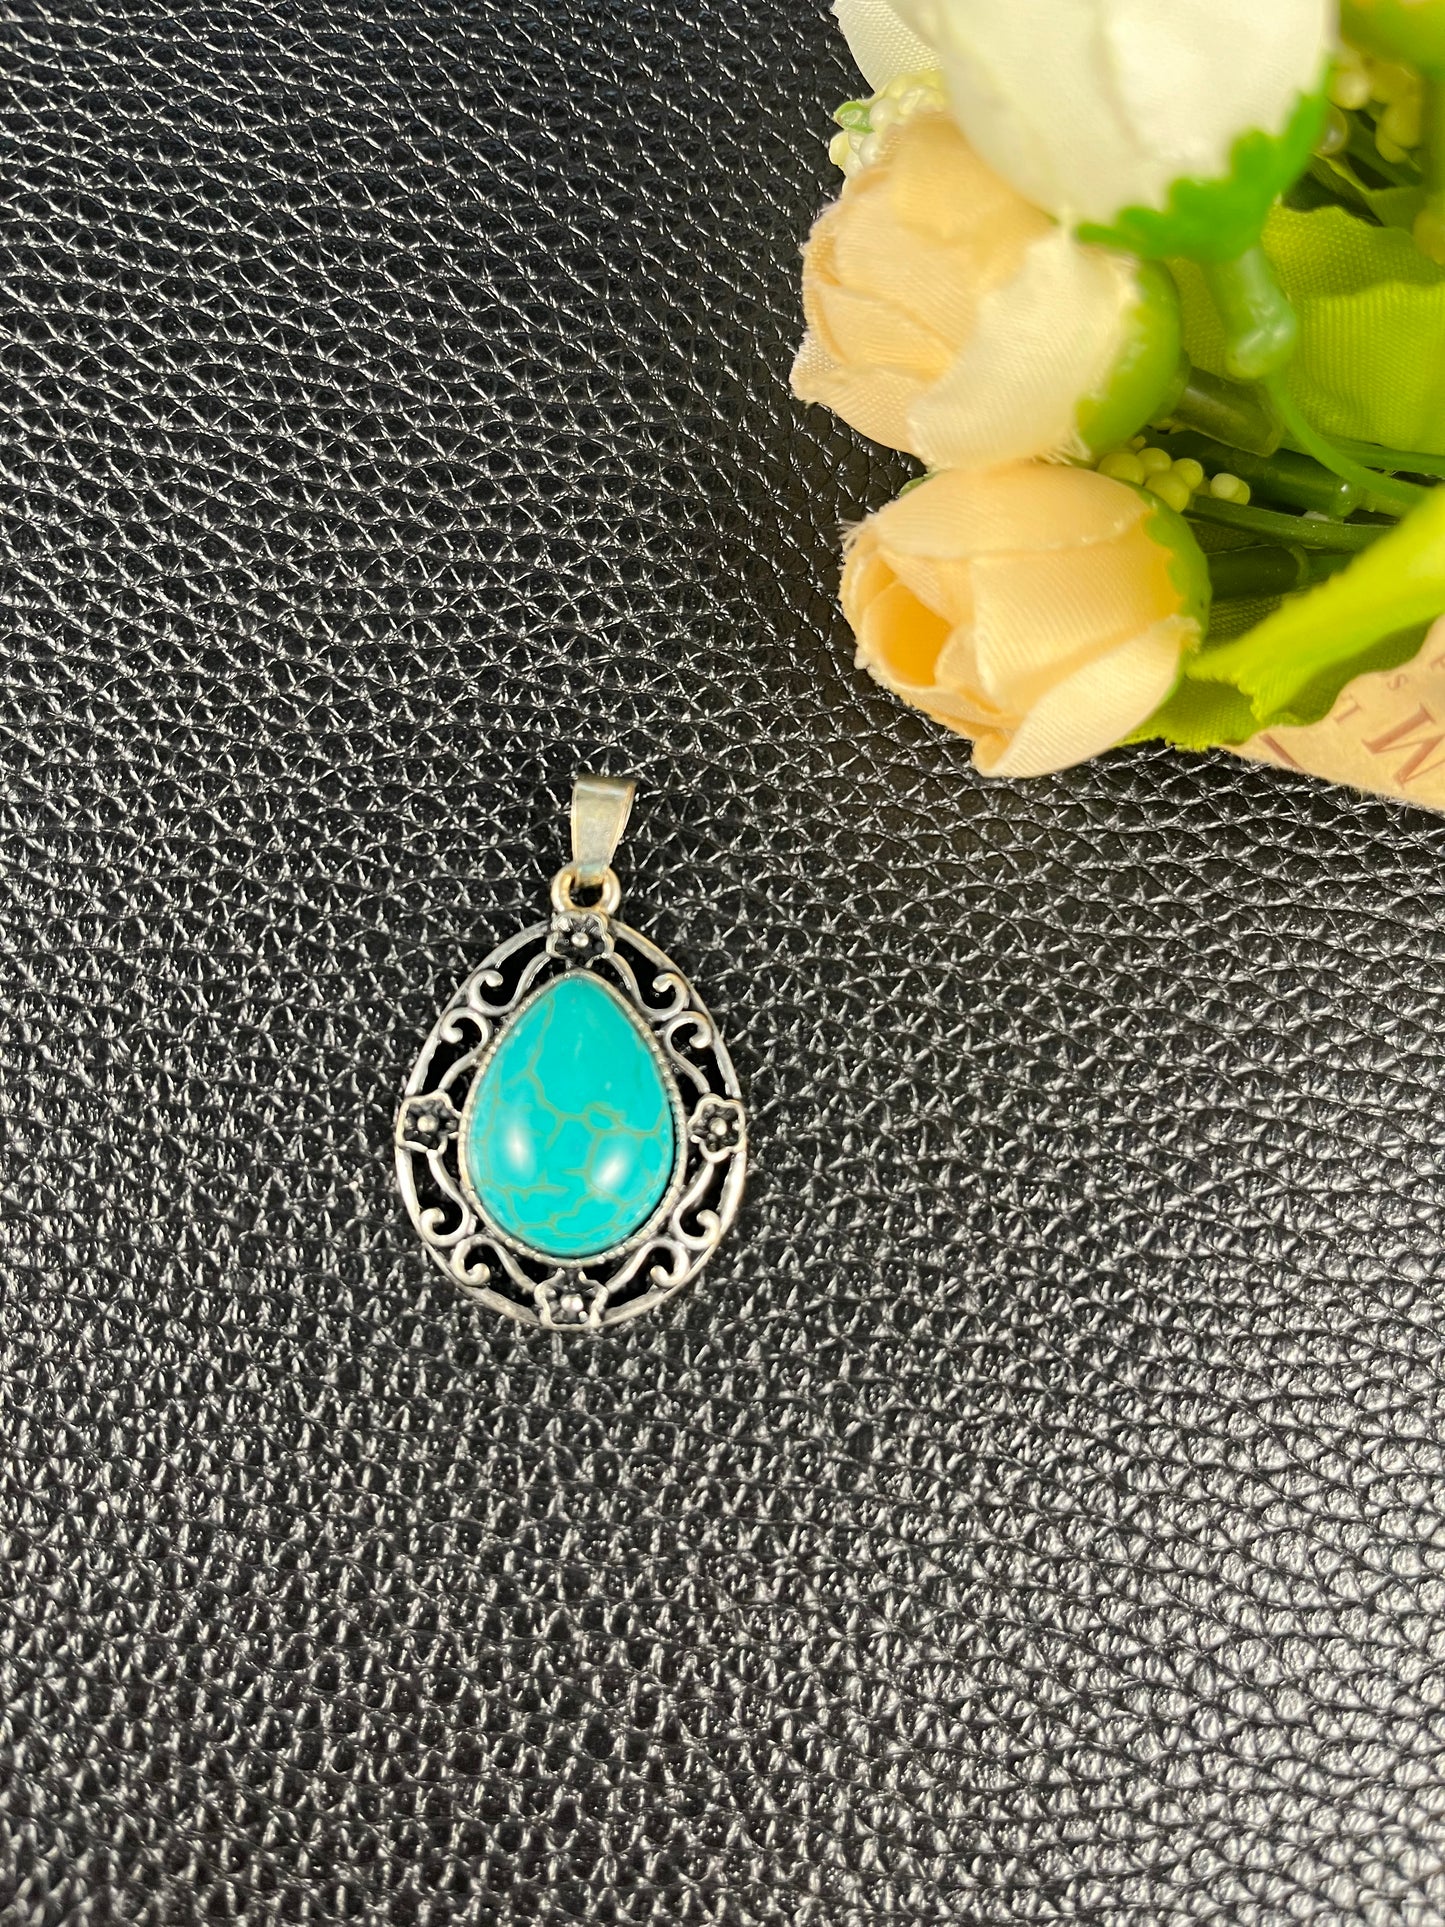 Toyouths Turquoise Pendant 925 Sterling Silver For Mom Gift - Stone gemstone Pendant Necklace Mother’s Day Jewelry Gift for Mom 925 Silver 18 inches Inch Long Chain Necklace, GREEN, 1 1/2 inches